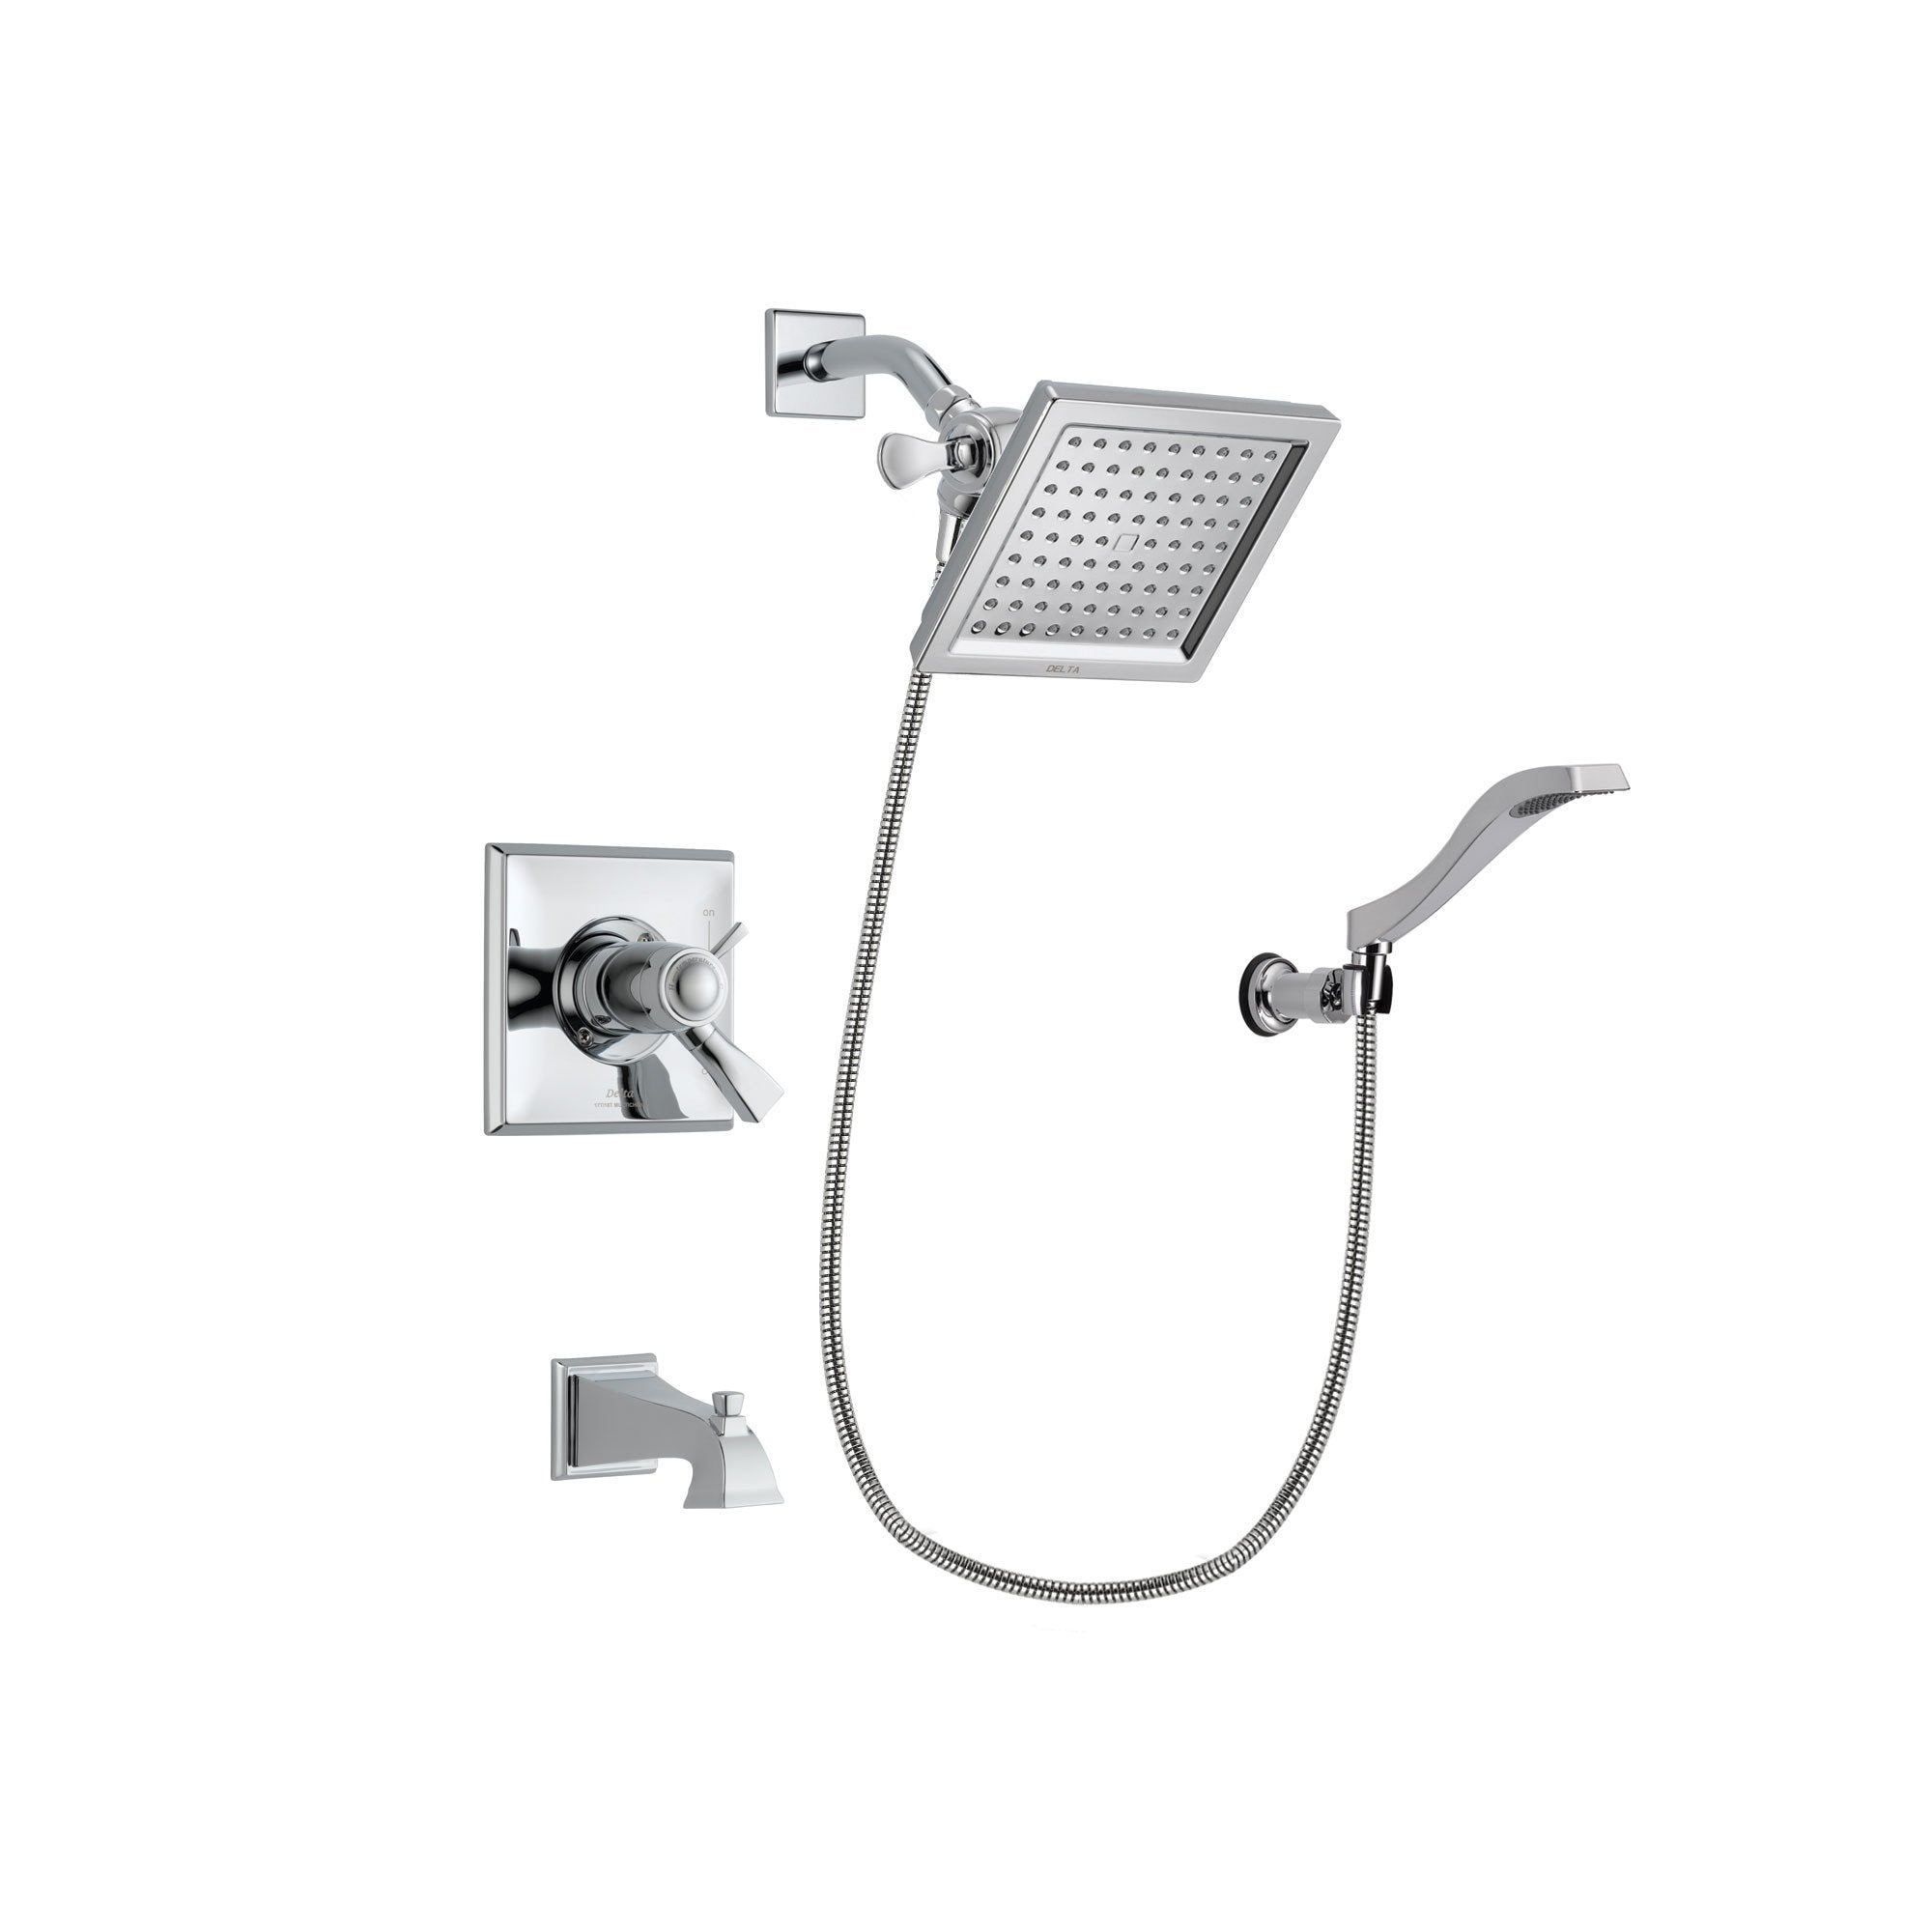 Delta Dryden Chrome Finish Thermostatic Tub and Shower Faucet System Package with 6.5-inch Square Rain Showerhead and Modern Handheld Shower Spray with Wall Bracket and Hose Includes Rough-in Valve and Tub Spout DSP0018V